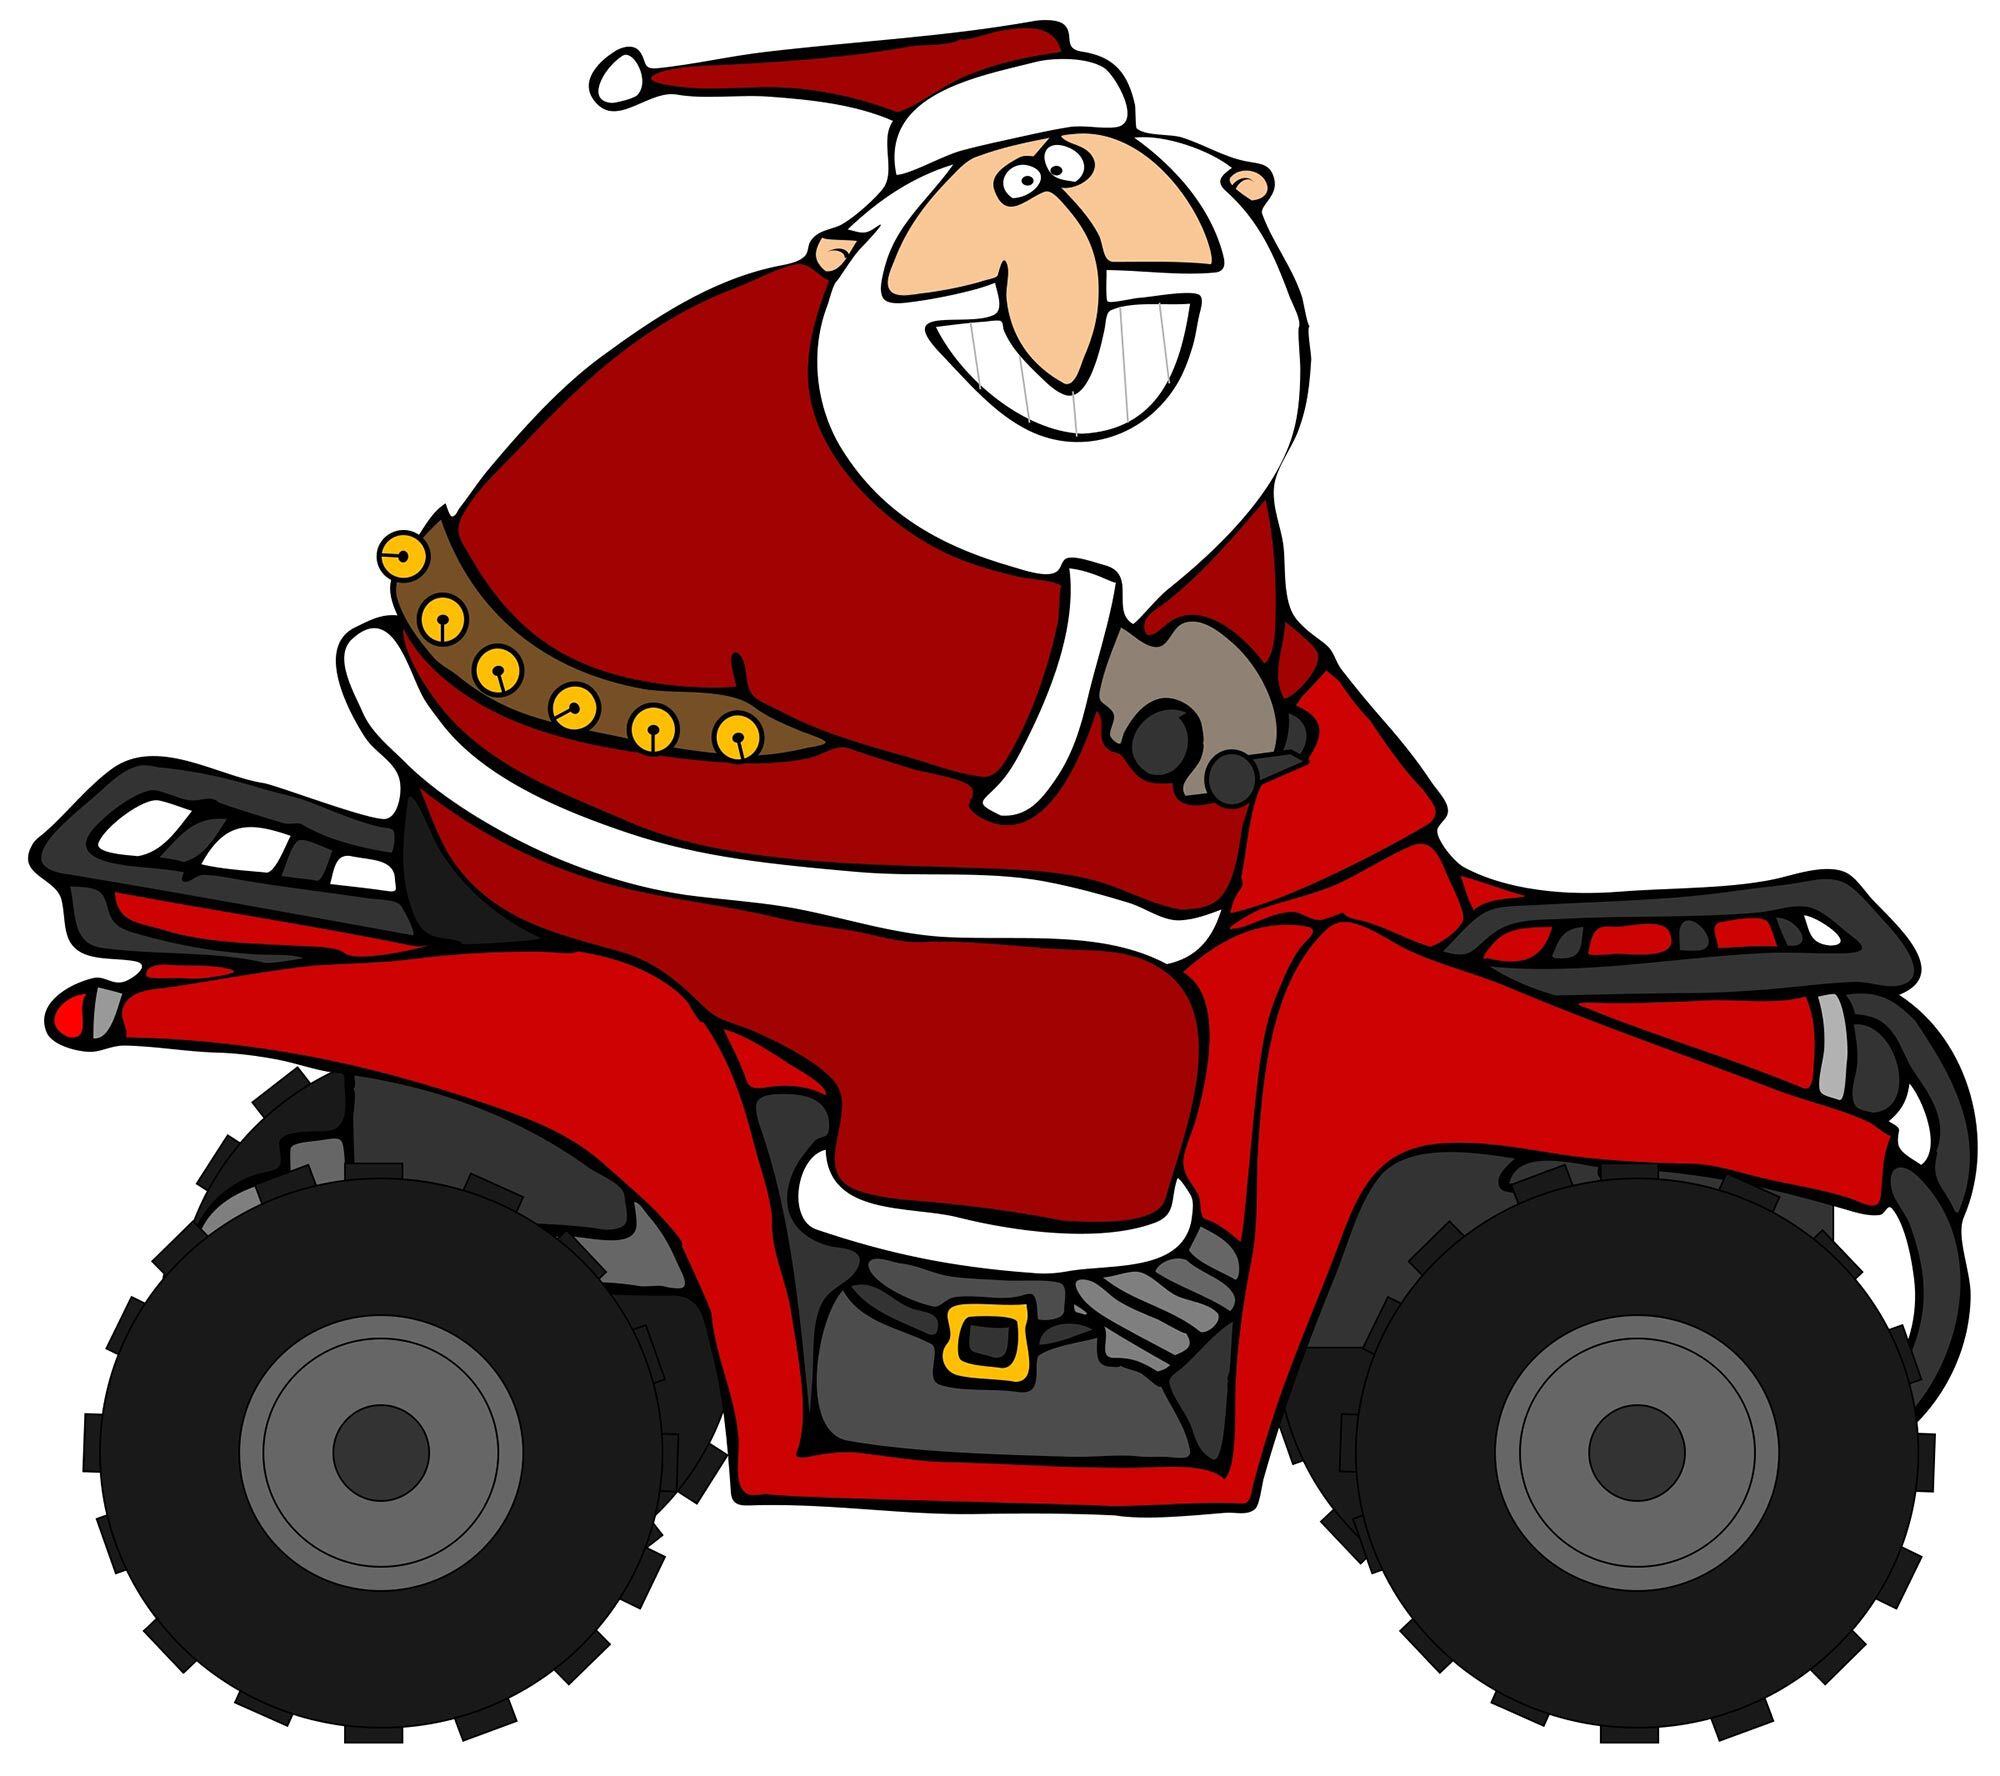 Even Santa is having a difficult time obtaining materials to create ATV-related Christmas gifts.